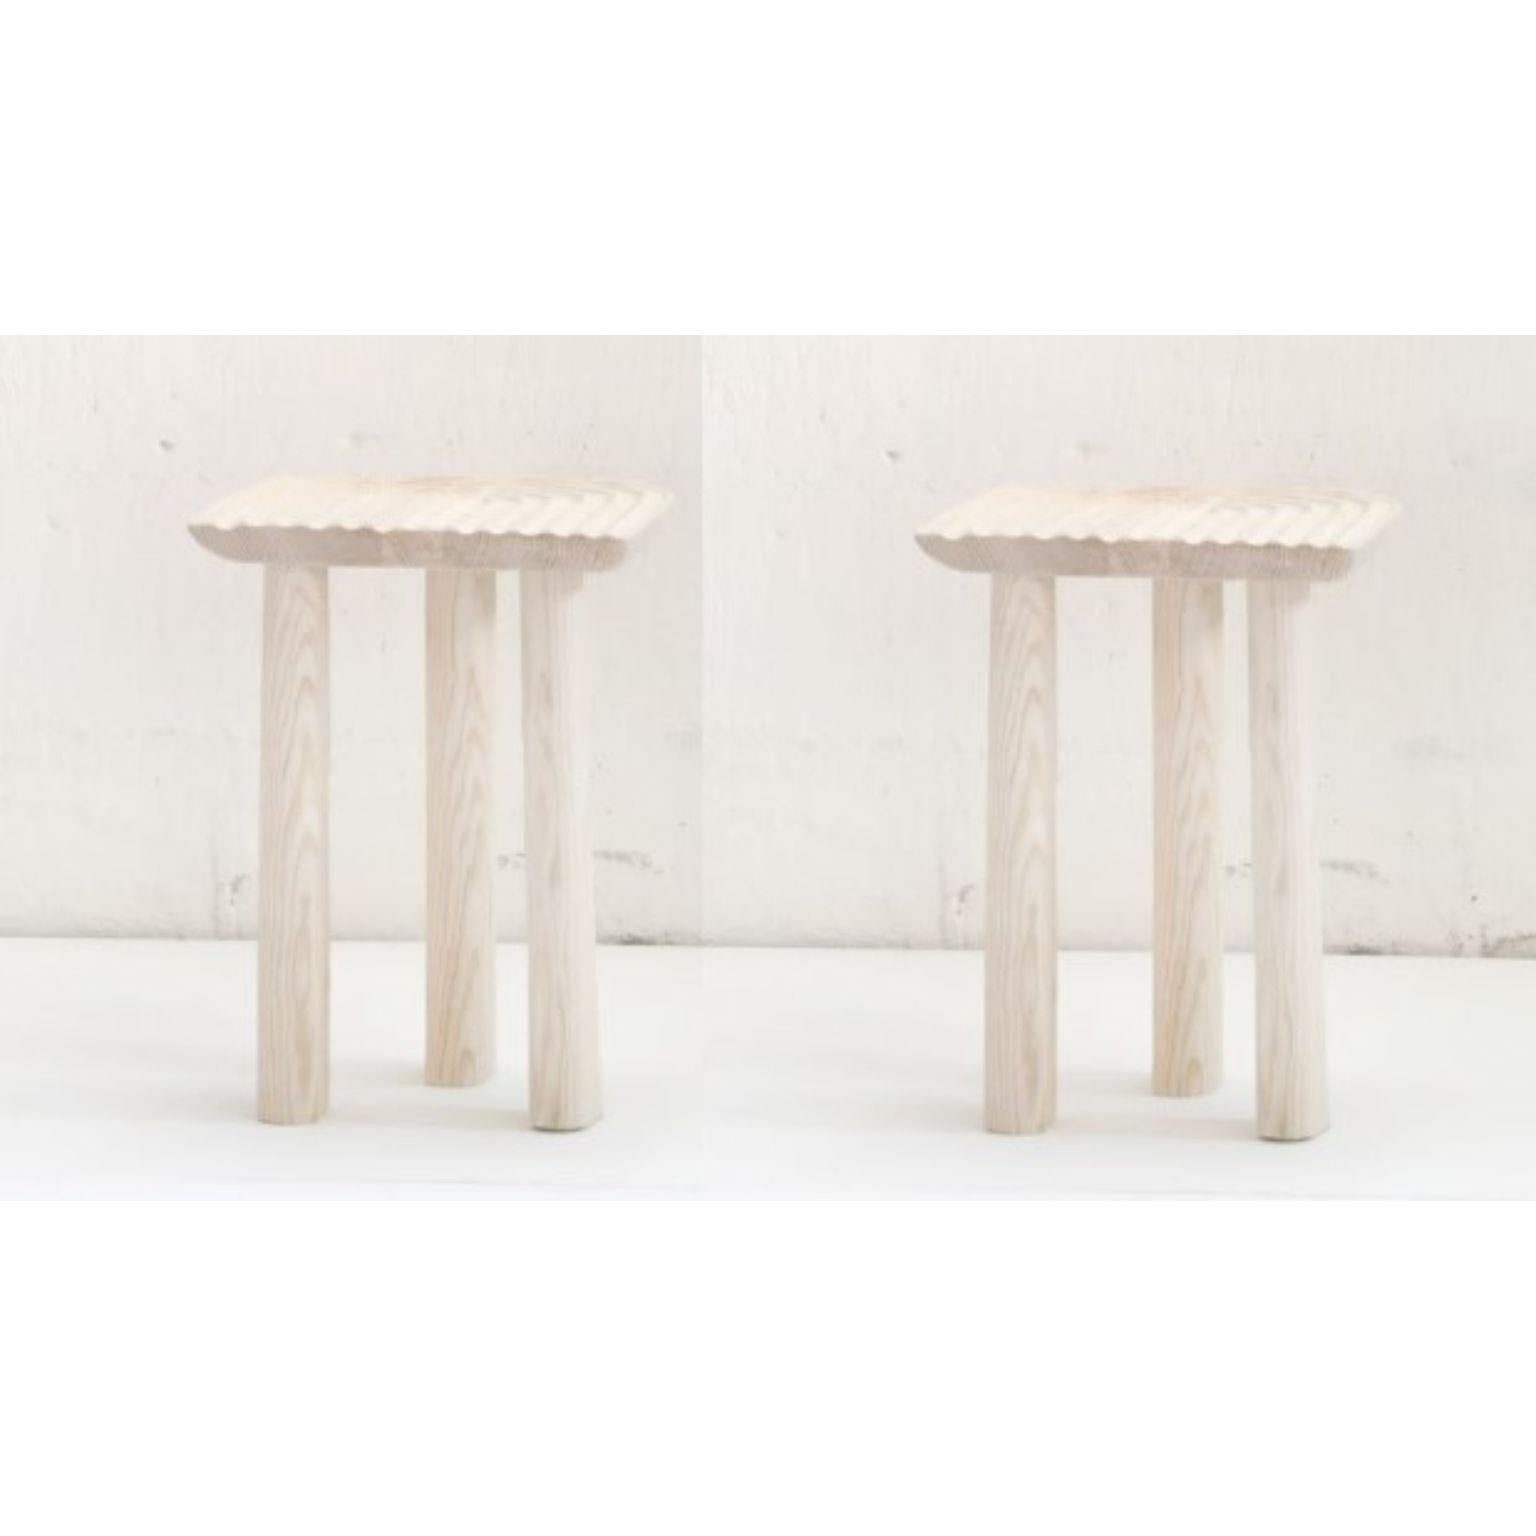 Set of 2 White Fingerprint stools by Victor Hahner
Each piece is unique, handmade by the designer and signed
Dimensions: W39,5x D27 x H 49 cm
Materials: White ash

Also Available: Blue and Black Fingerprint Stool

Victor Hahner is a German